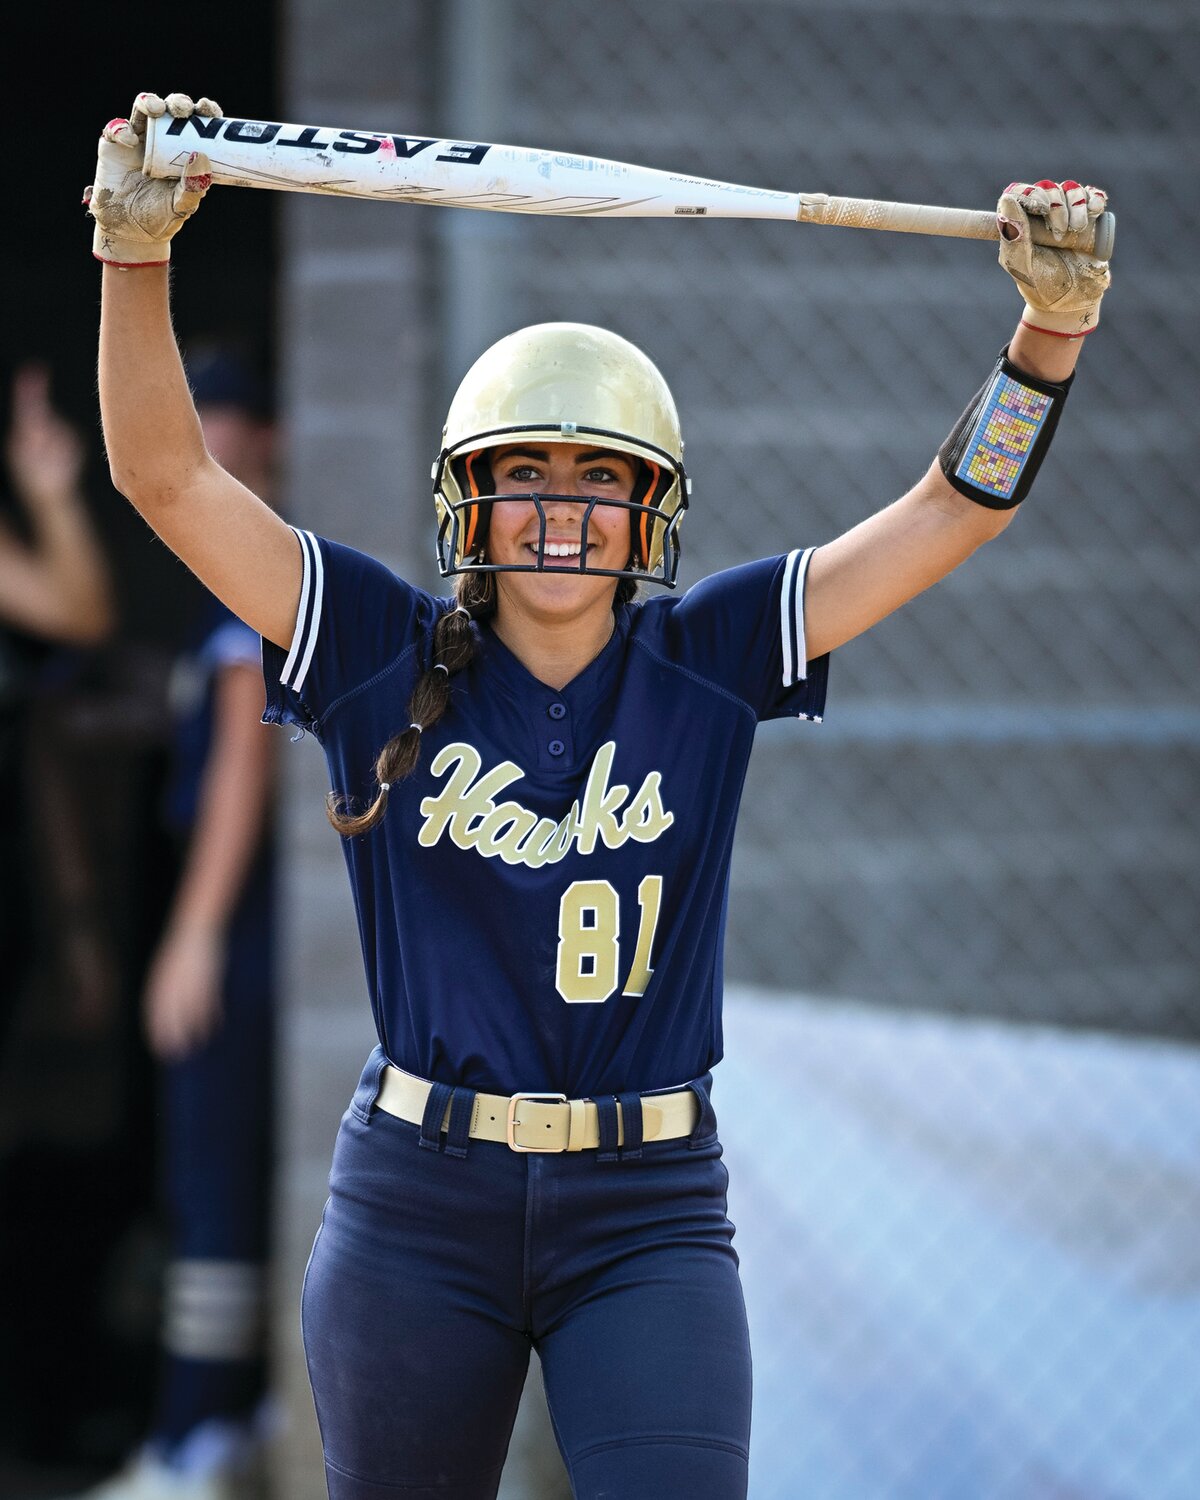 Council Rock South’s Avery Tumolo can only smile after a questionable call during her fifth-inning at bat.